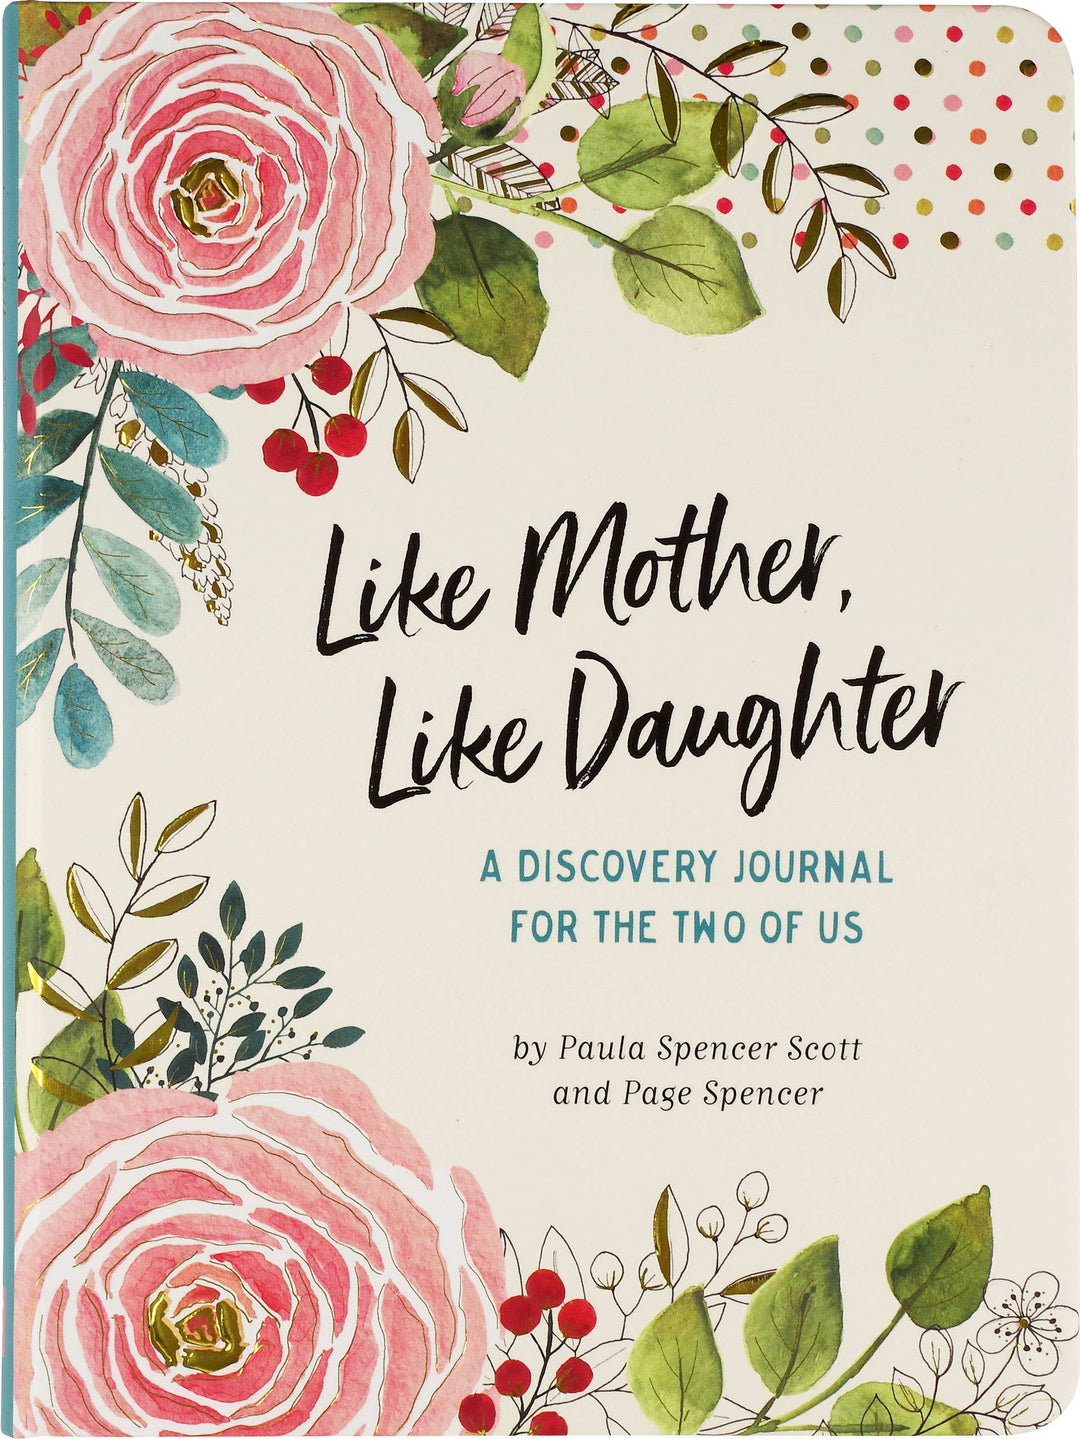 Peter Pauper Press - Like Mother, Like Daughter Journal (Modern Classic Edition)